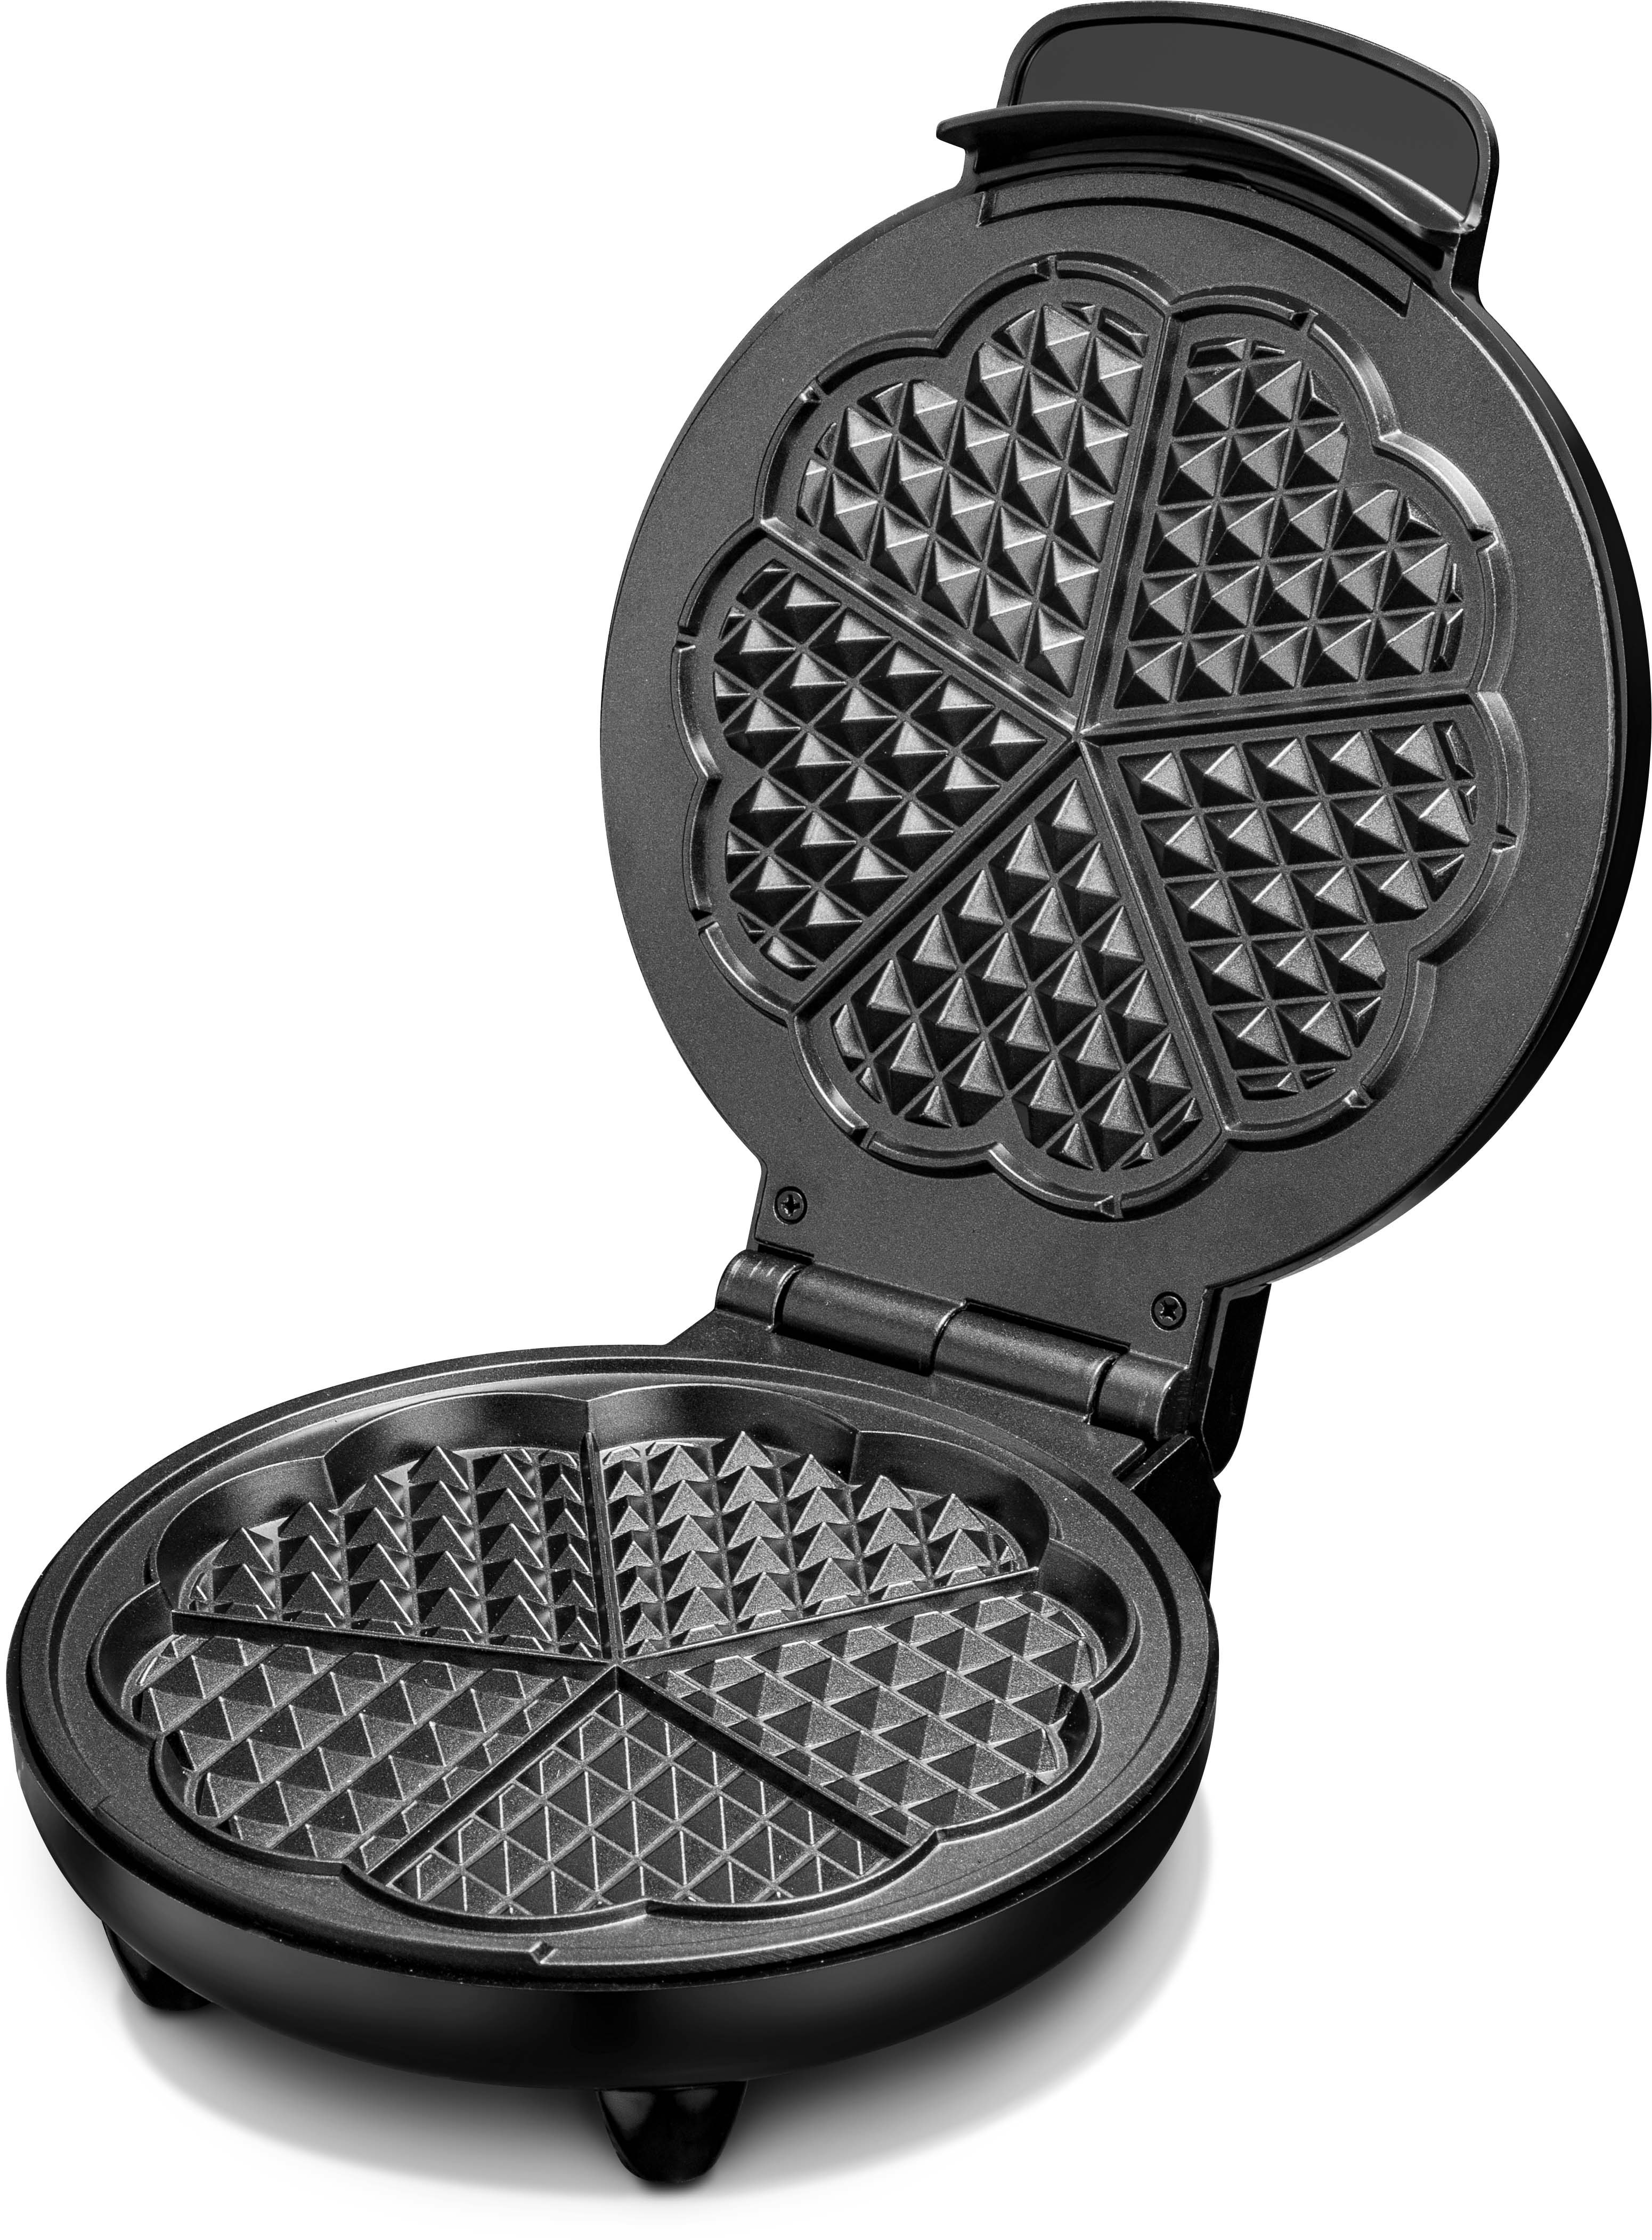 Waffle Maker, 5 heart shaped waffles, 19 cm, 1000 W, Automatic  temperature control